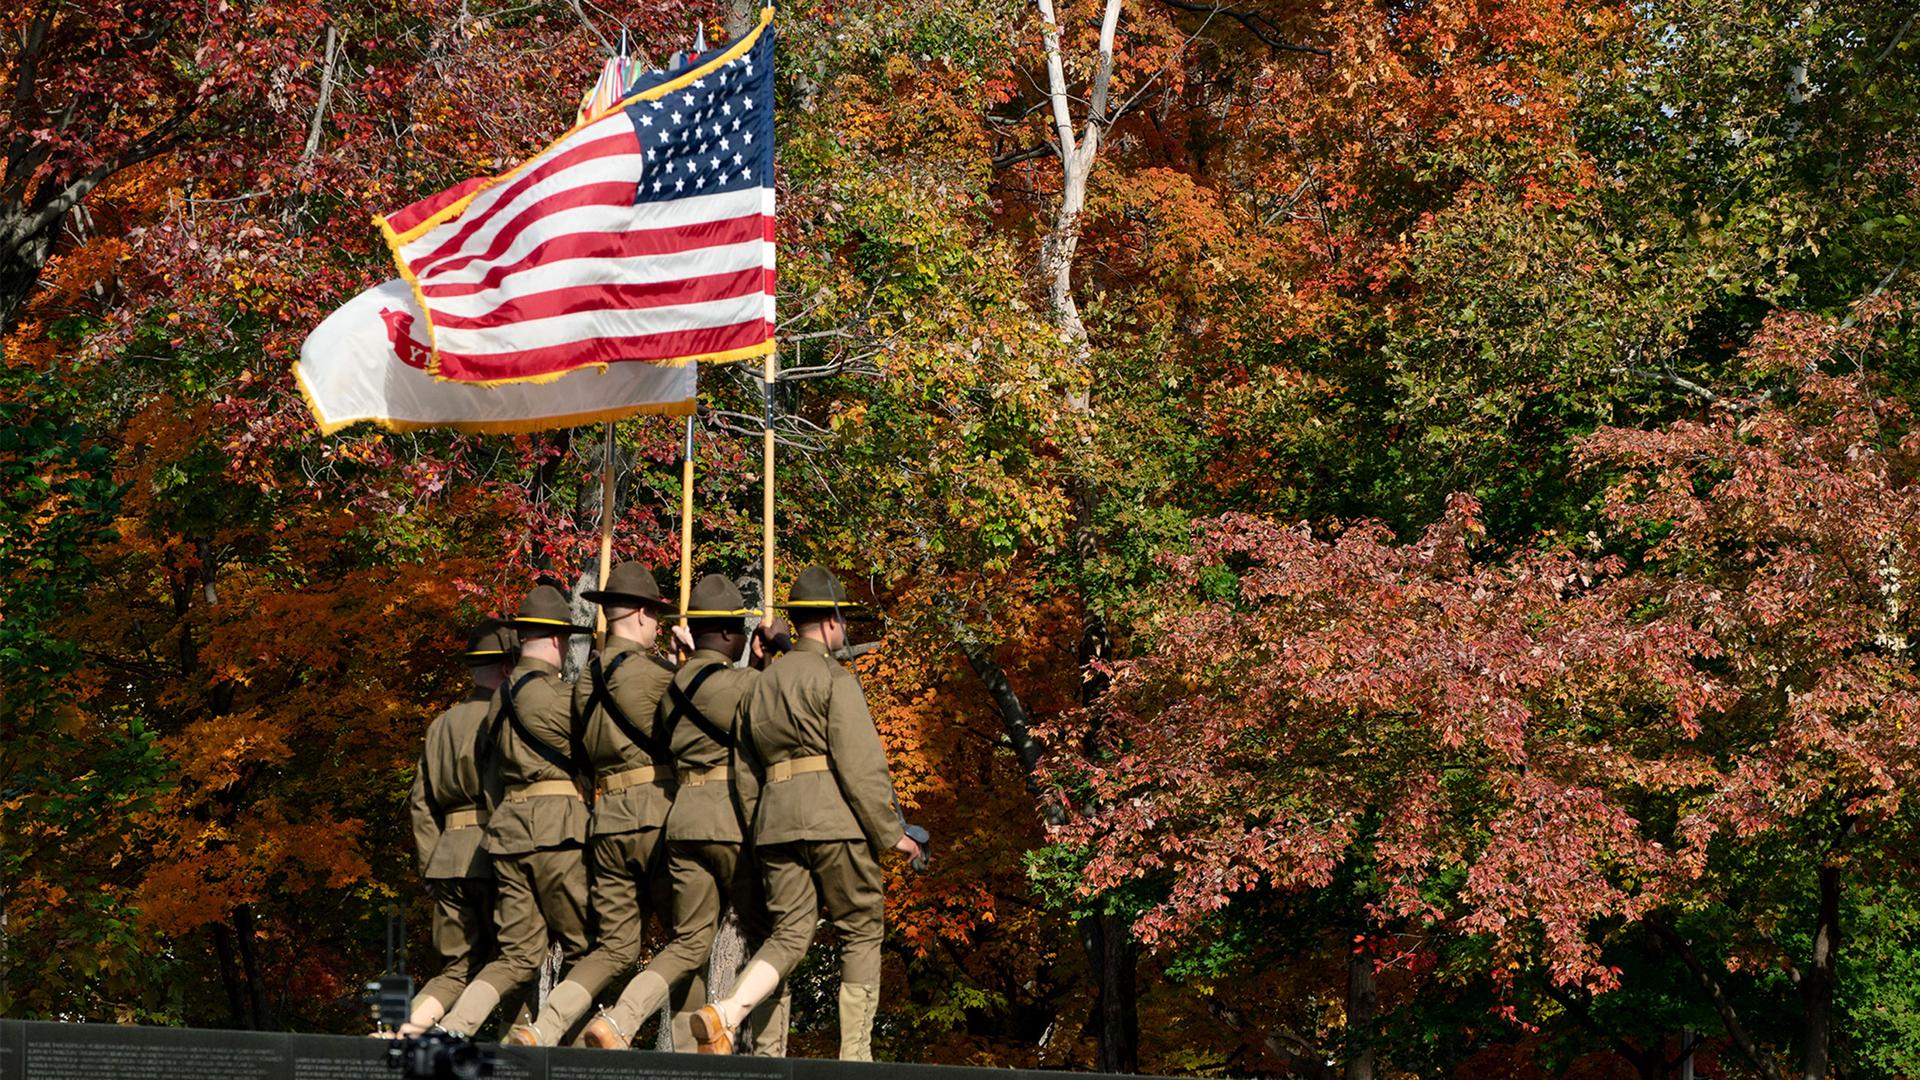 Color guard retires the colors during a Veterans Day commemoration ceremony at the Vietnam Veterans Memorial in Washington amid brightly colored trees